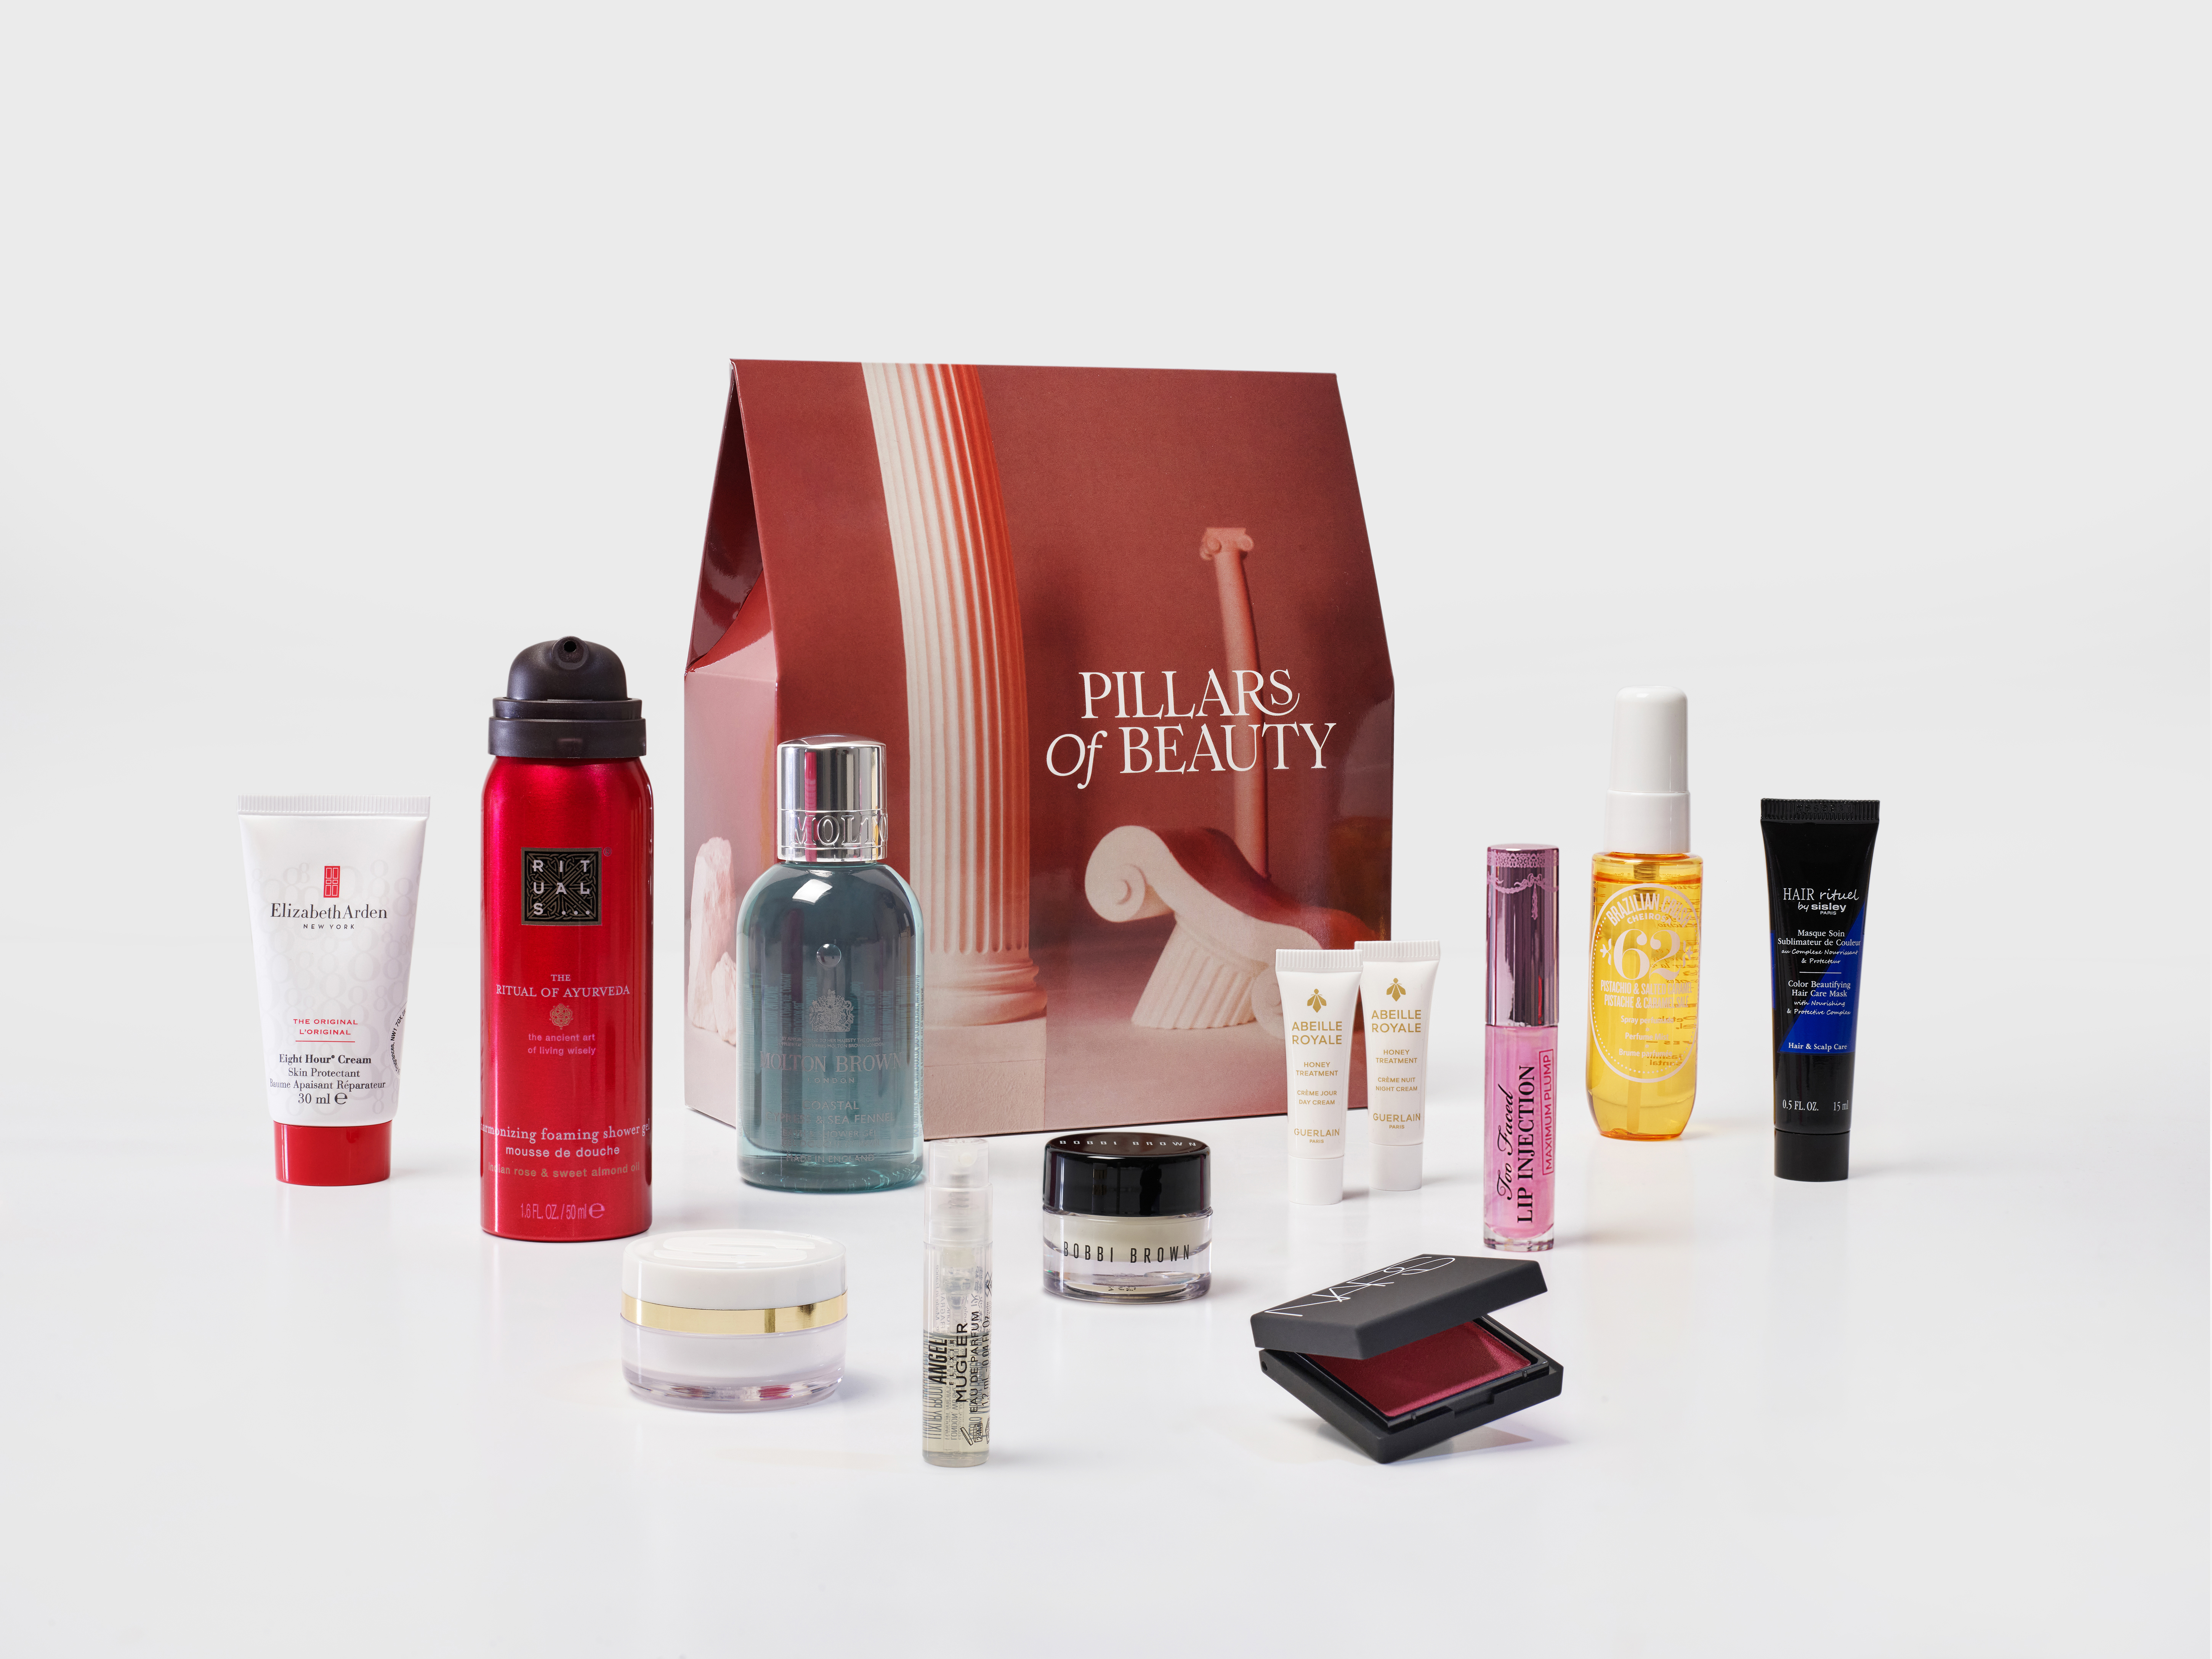 Spend £220 in Beauty and Receive your complimentary gift worth over £129